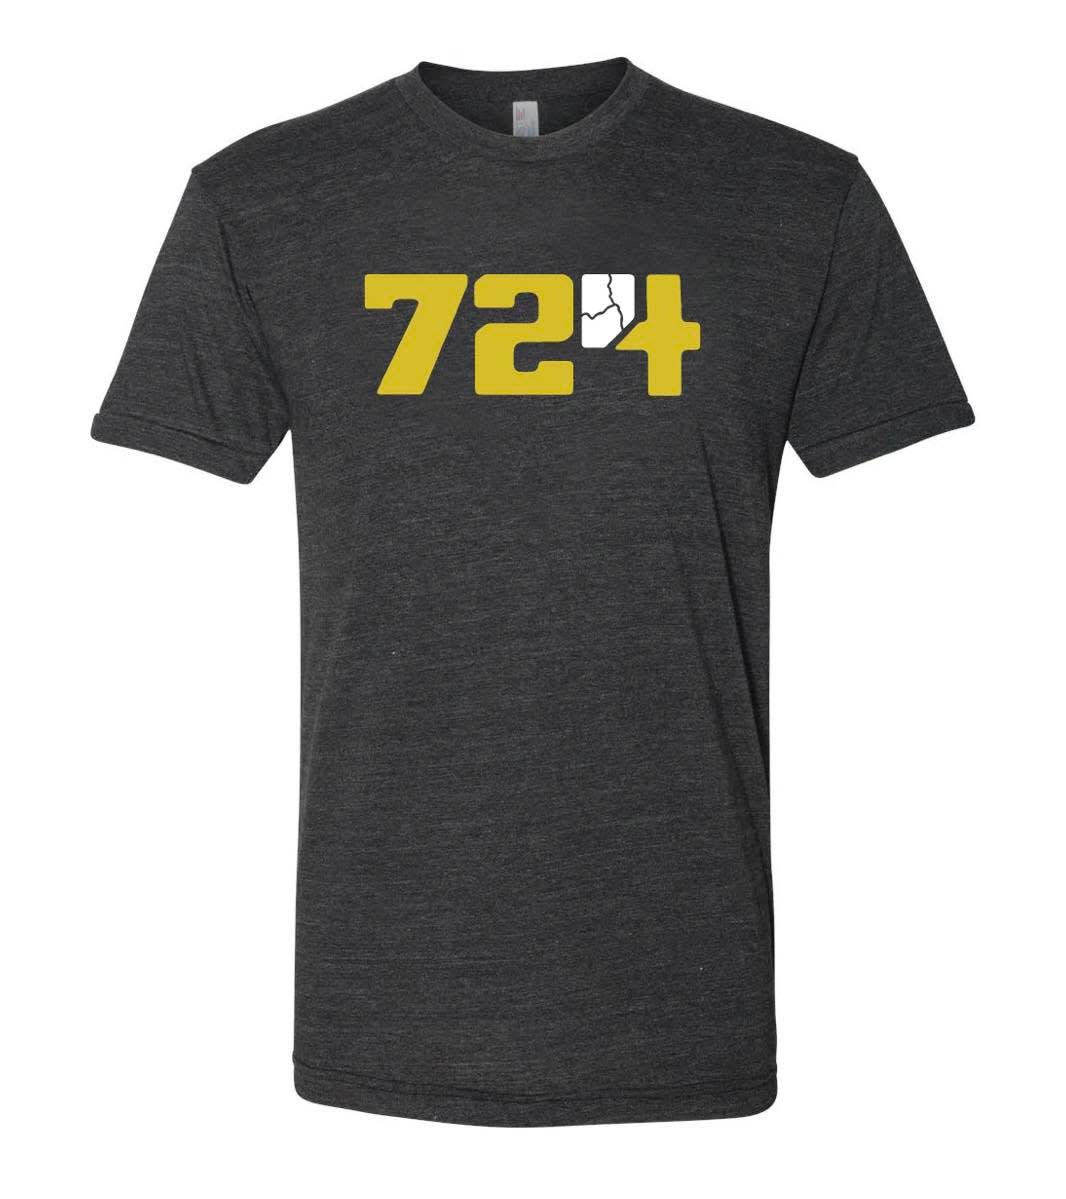 One of the 724 T-shirts sold by Beavtown in downtown Beaver.